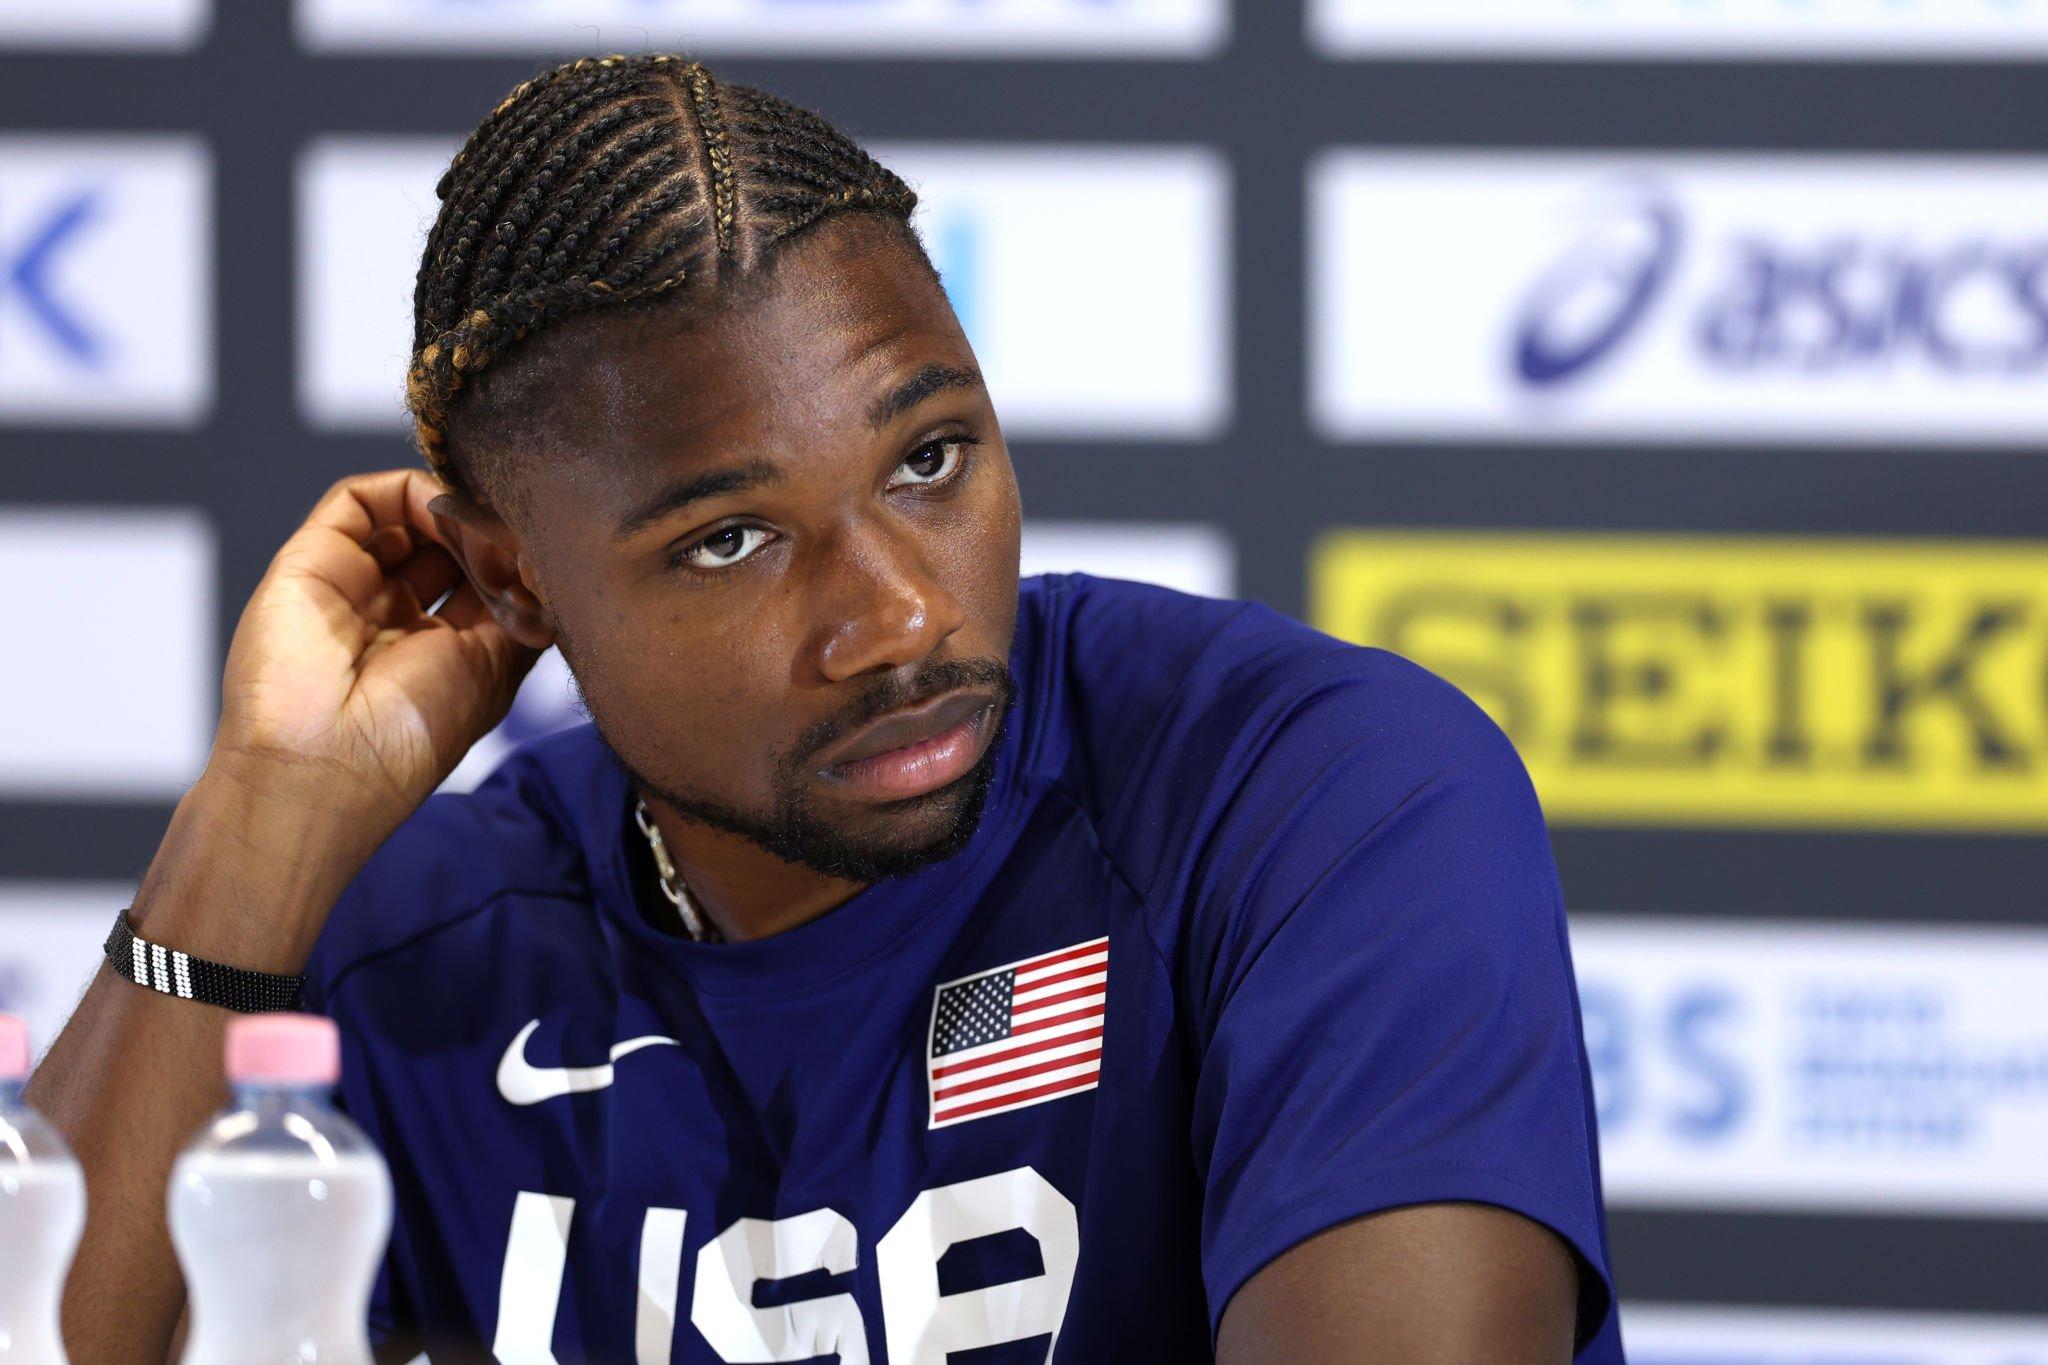 BUDAPEST, HUNGARY - AUGUST 18: Noah Lyles of Team United States looks on during a press conference ahead of the World Athletics Championships Budapest 2023 at National Athletics Centre on August 18, 2023 in Budapest, Hungary. (Photo by Christian Petersen/Getty Images for World Athletics)